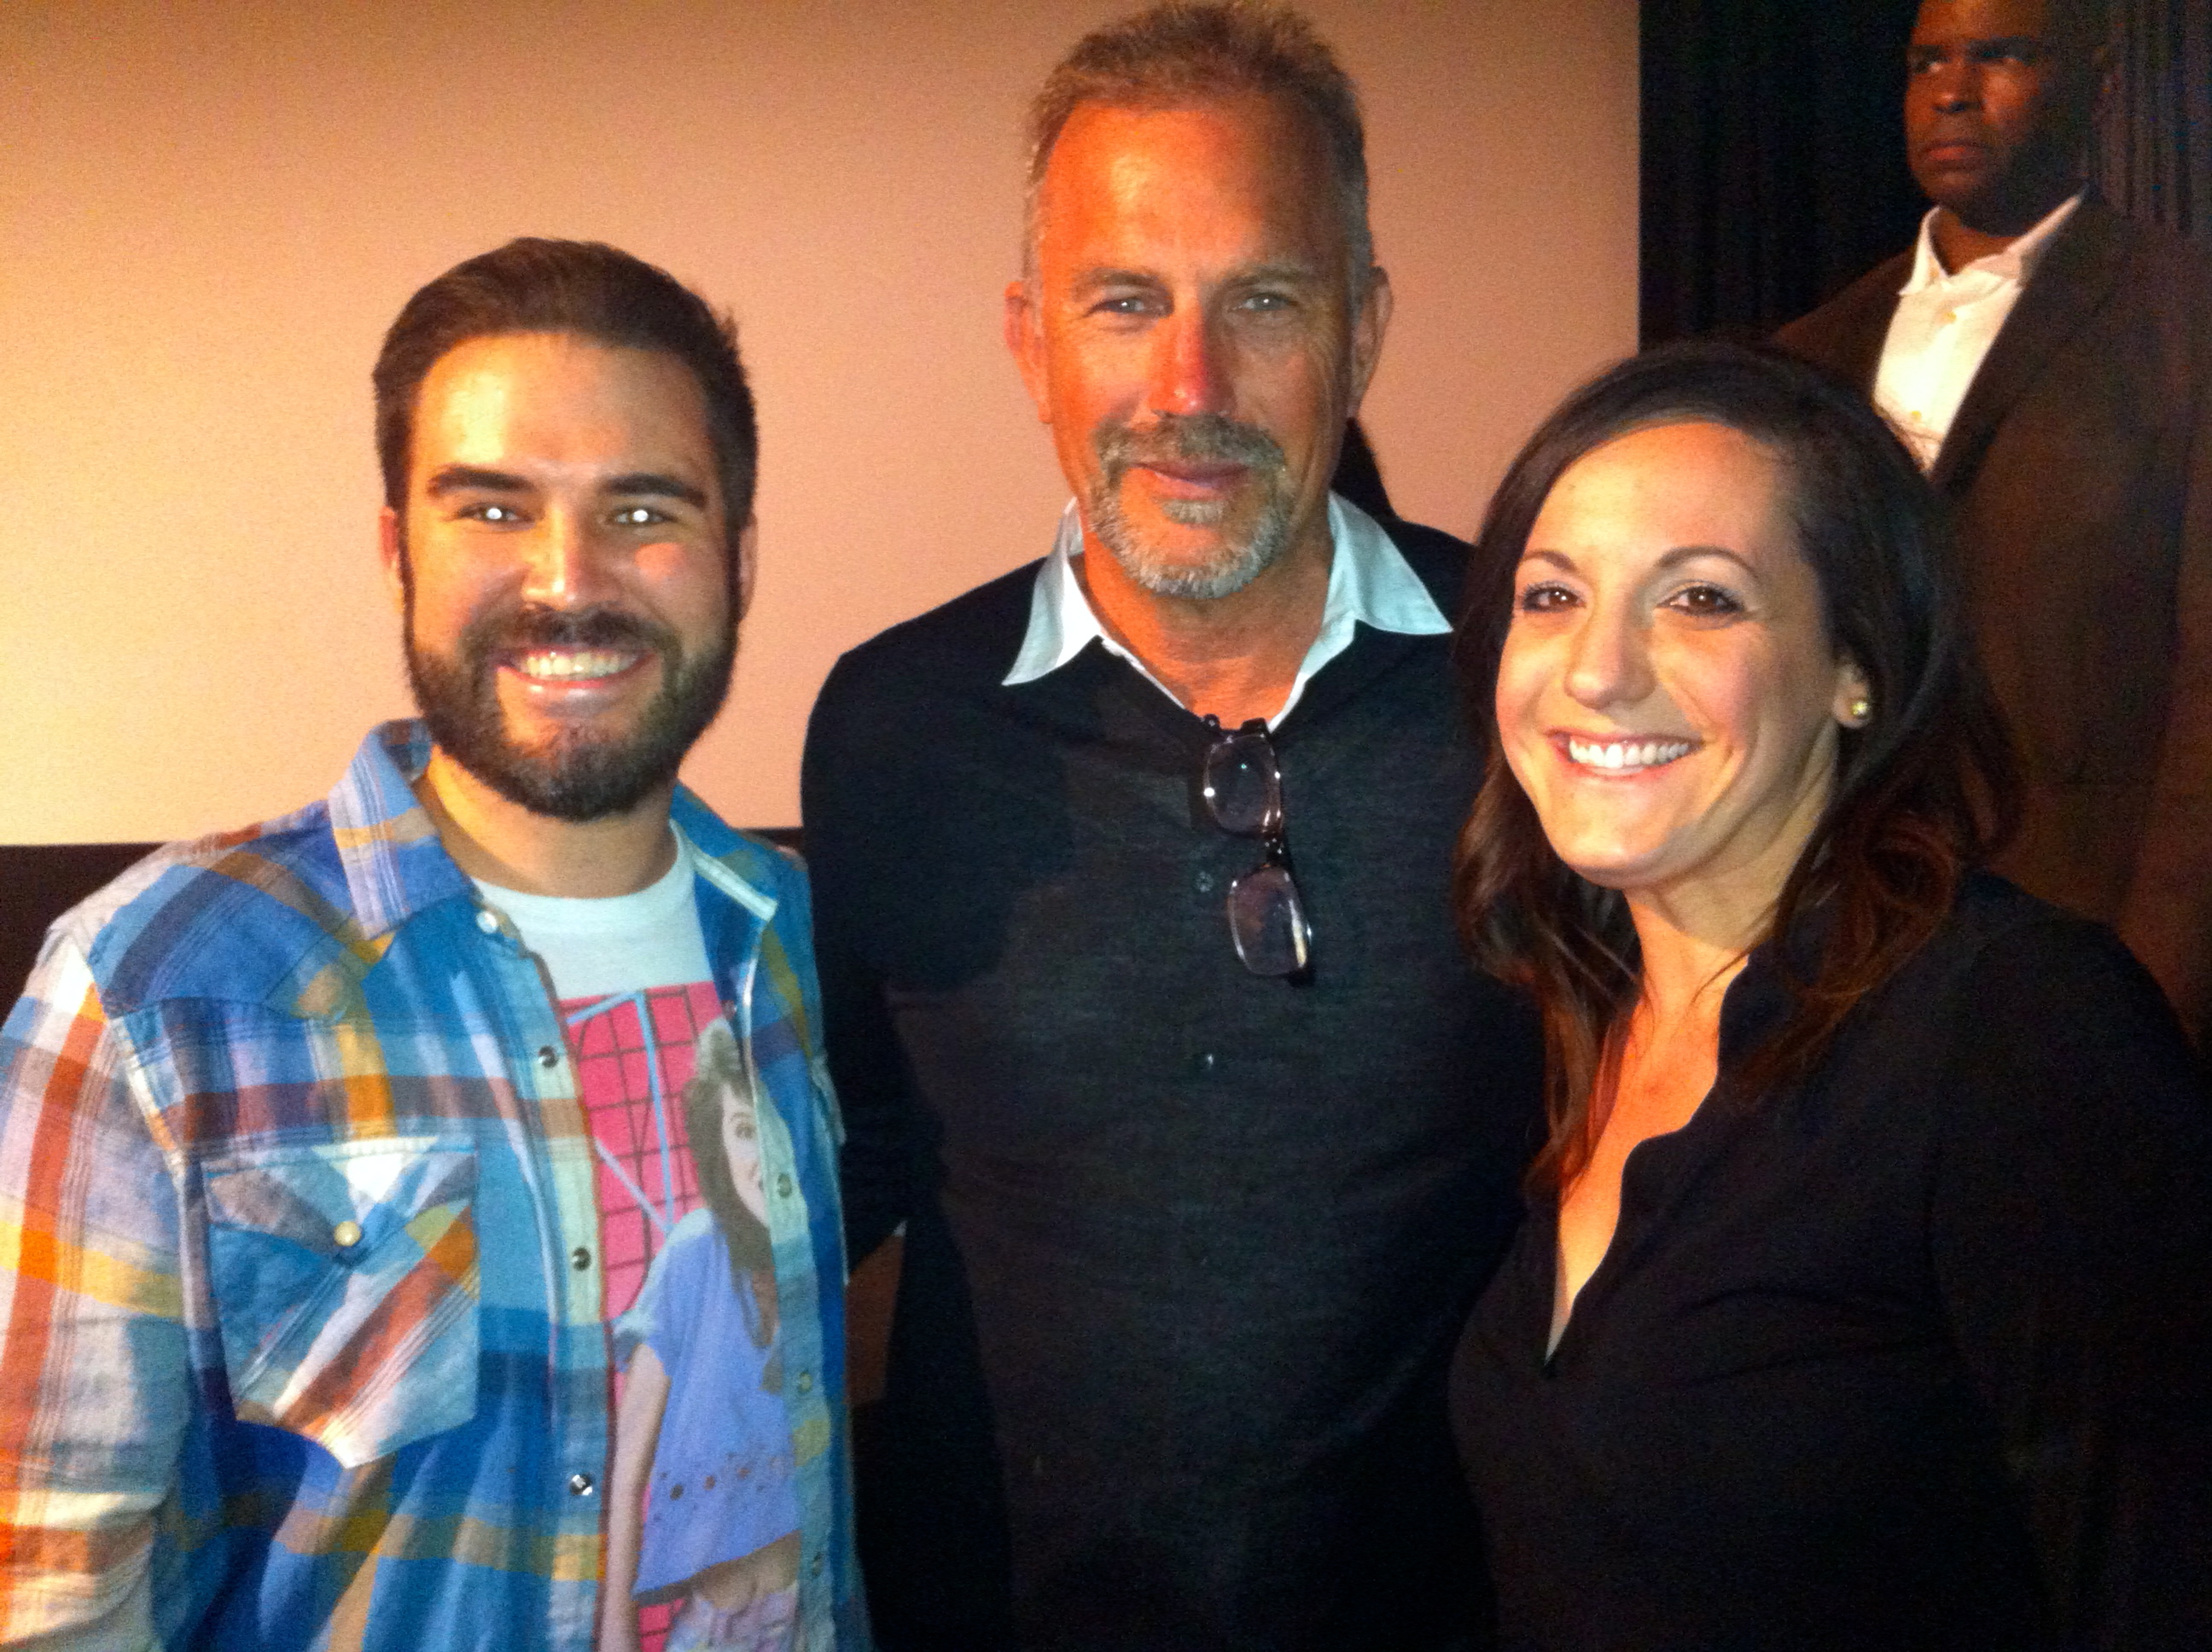 Hanging out with Robin Hood himself, Kevin Costner